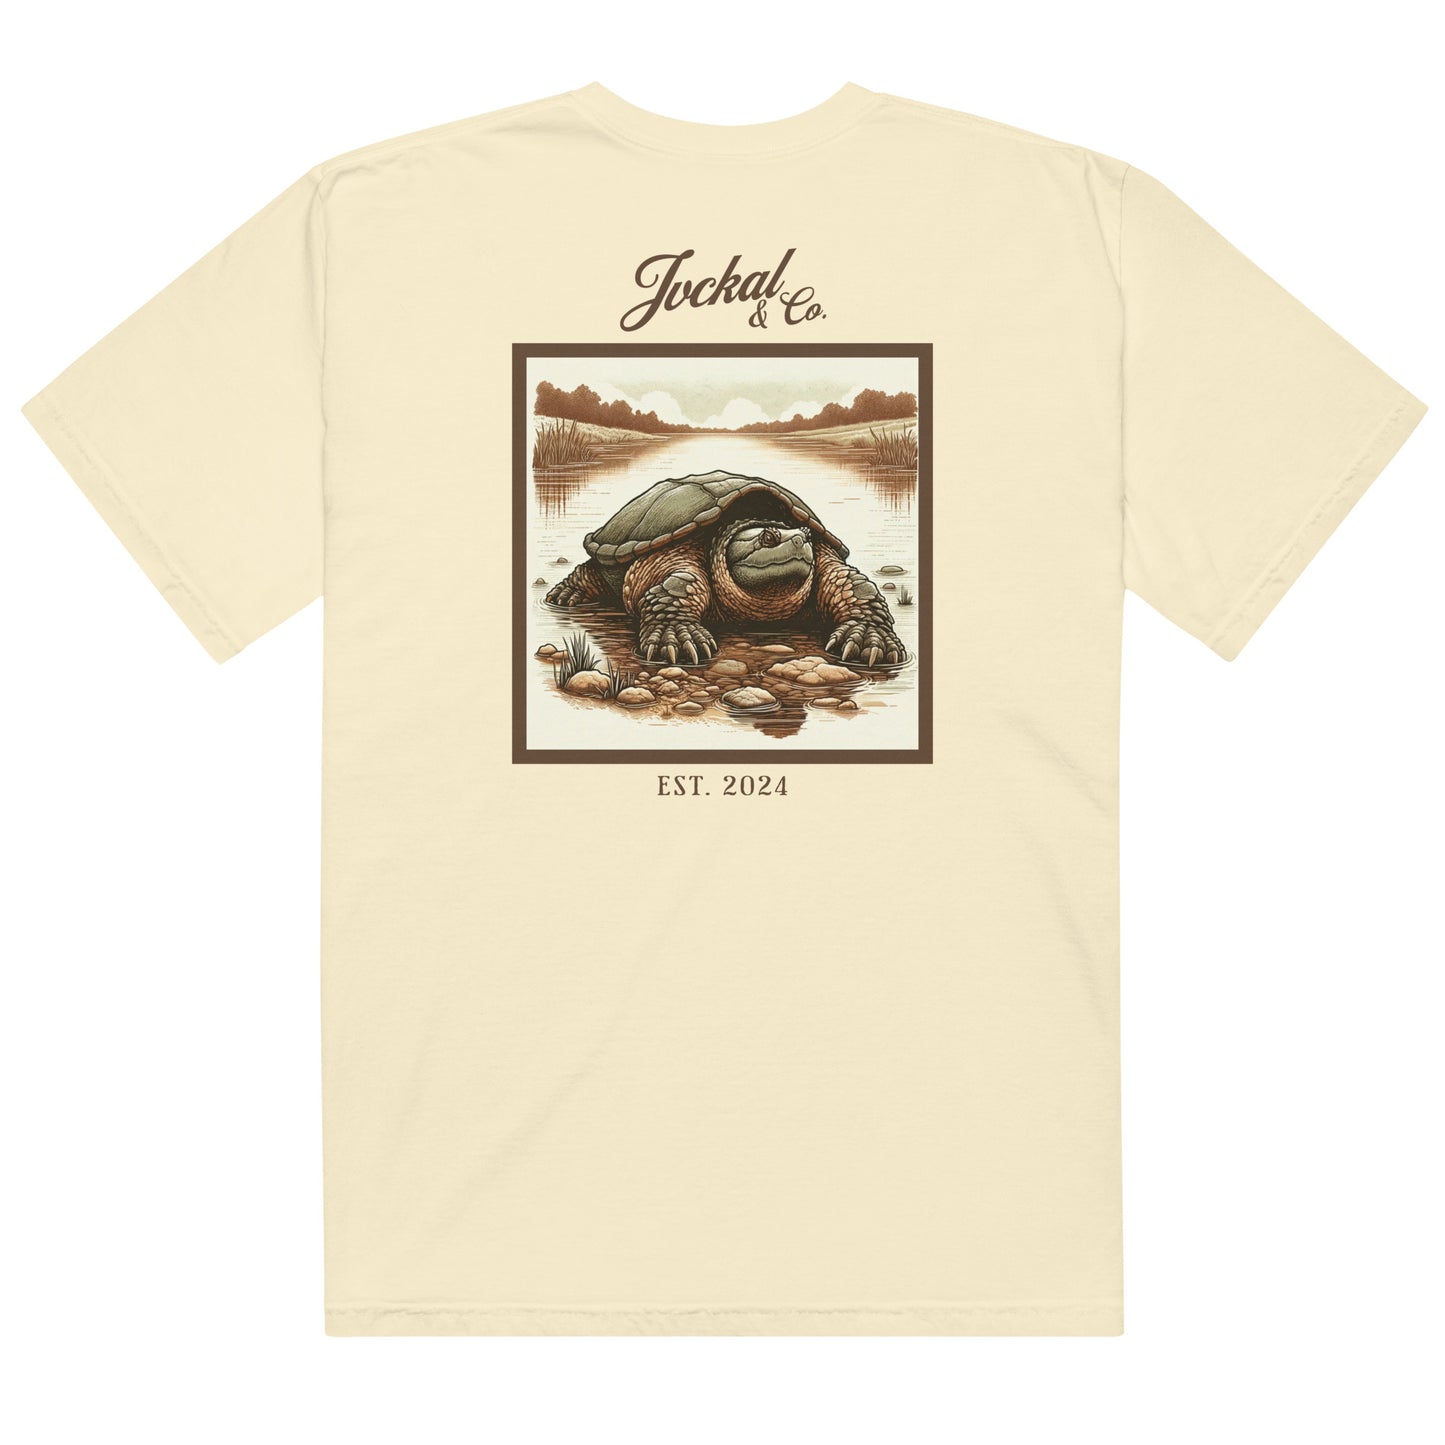 SNAPPING TURTLE TEE